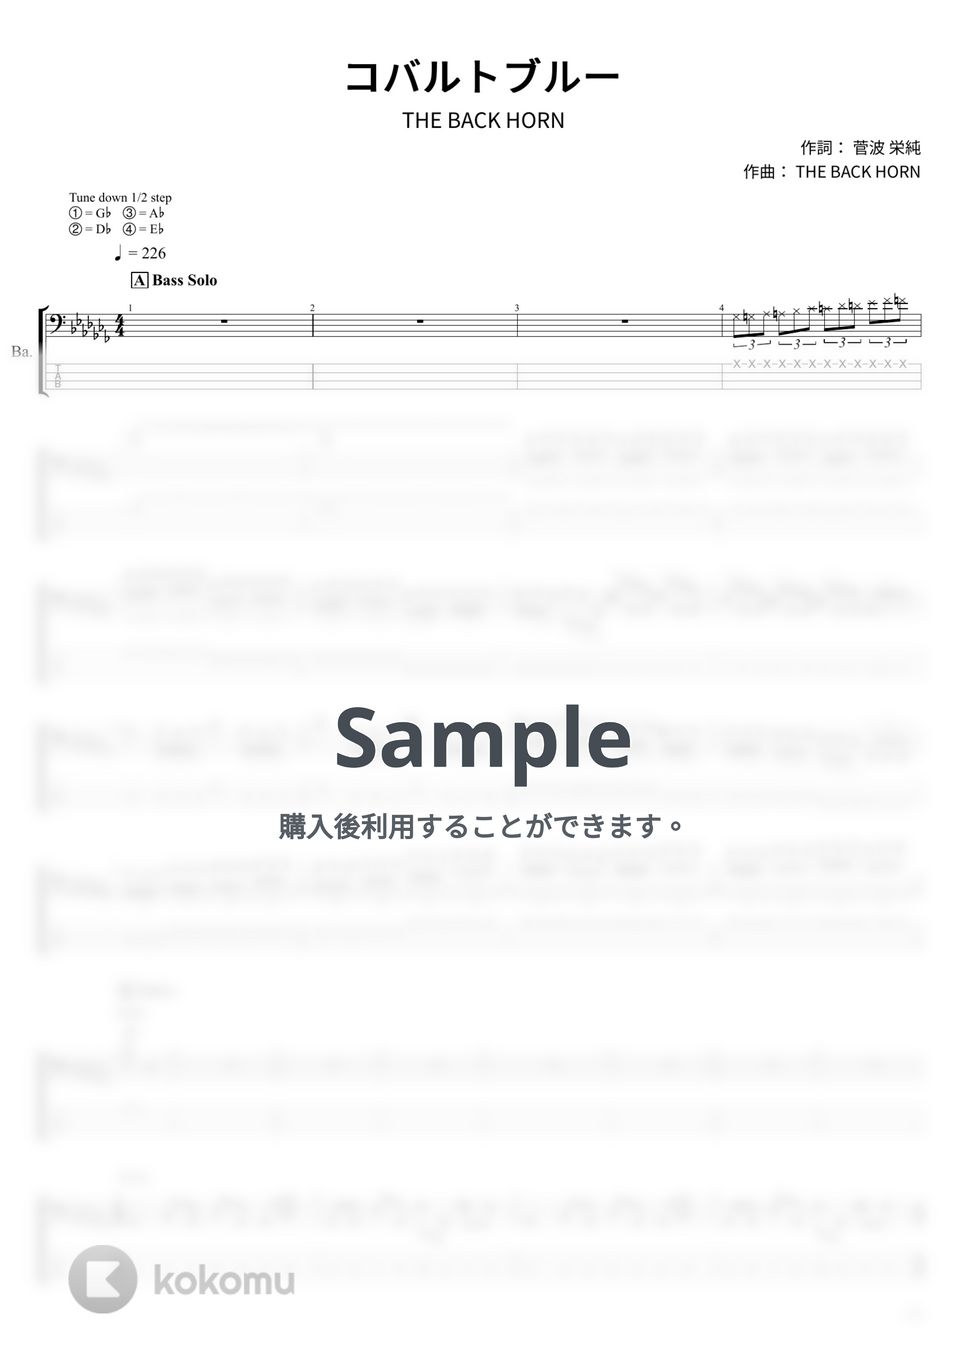 THE BACK HORN - コバルトブルー (ベース Tab譜 4弦) by T's bass score